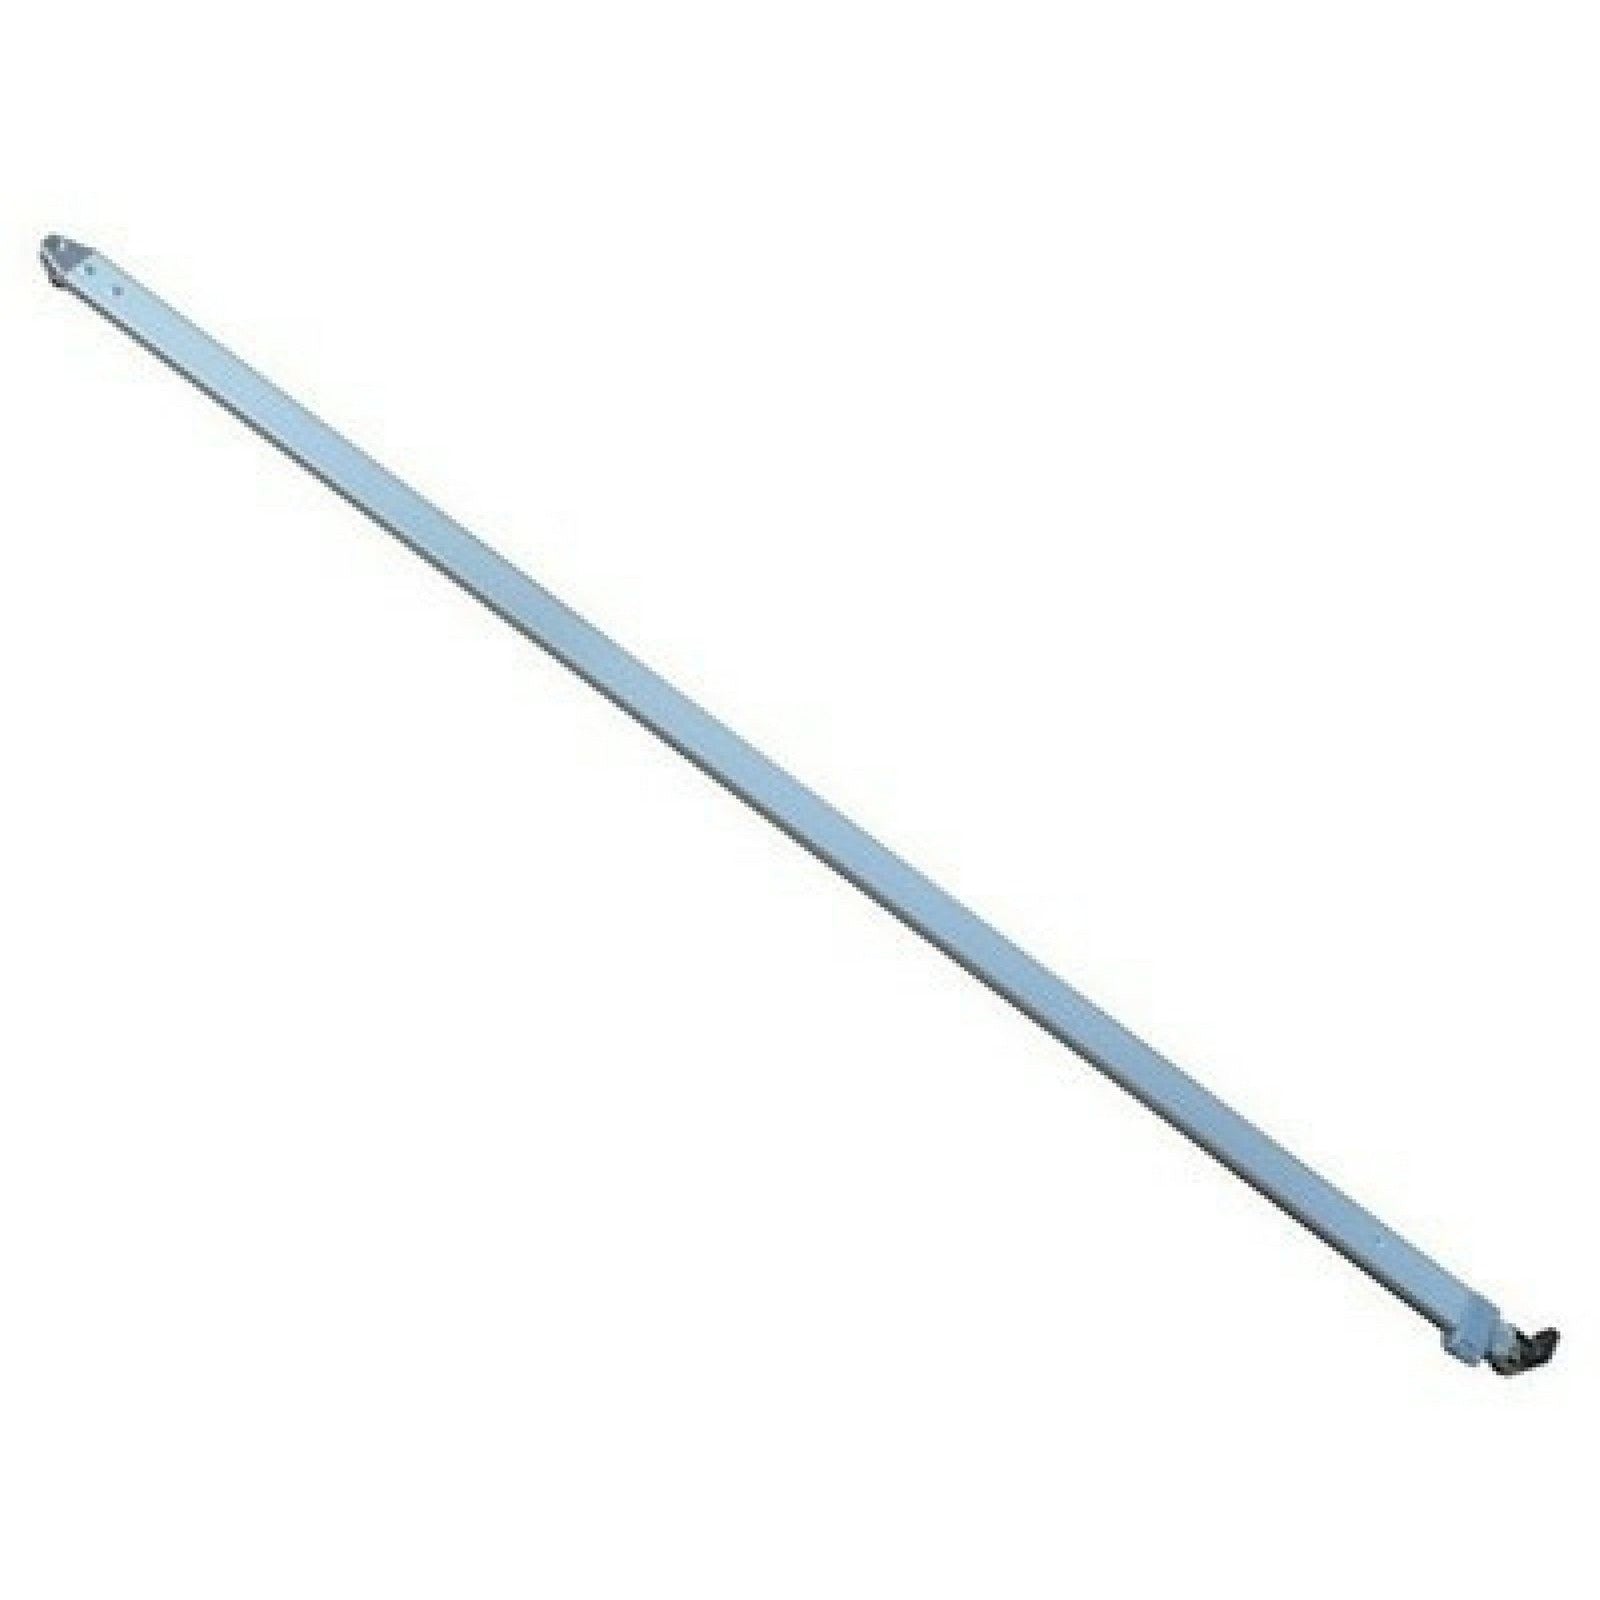 Fiamma Caravanstore L/H Support Leg made by Fiamma. A Accessories sold by Quality Caravan Awnings